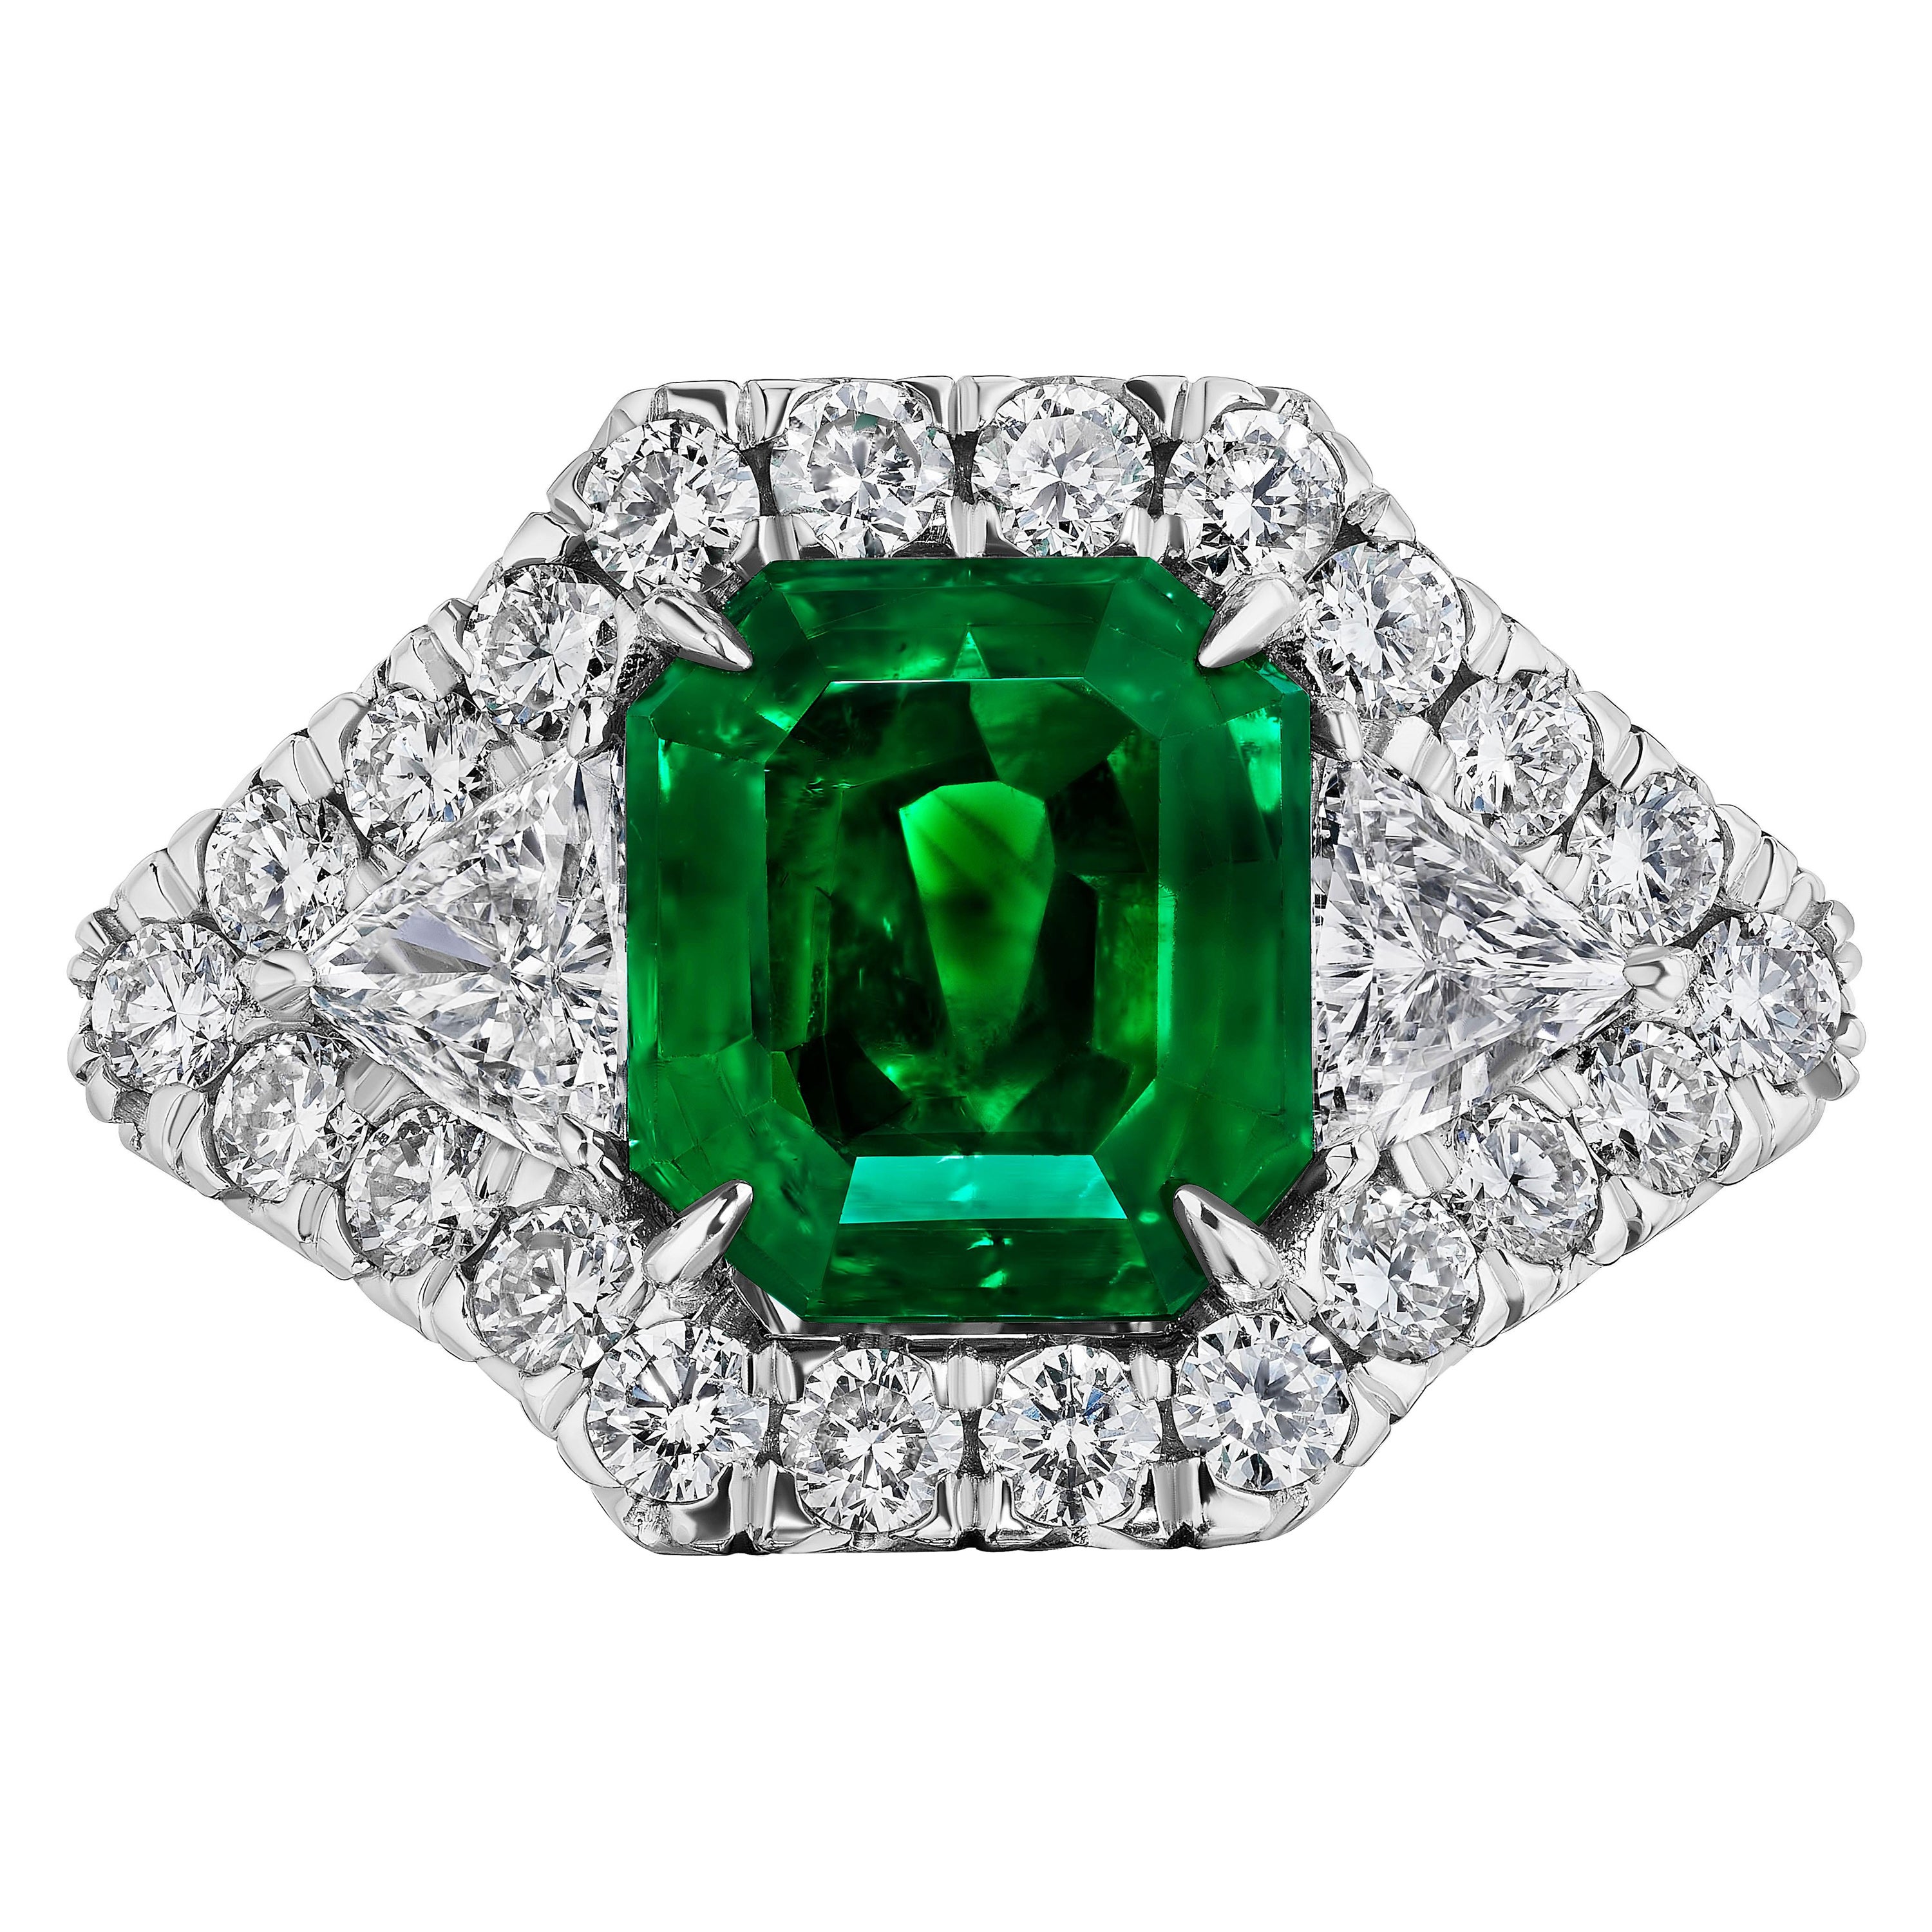 Auction - GIA Certified 4.99 Carat Colombian Emerald and 2.01 Carat Diamond Ring